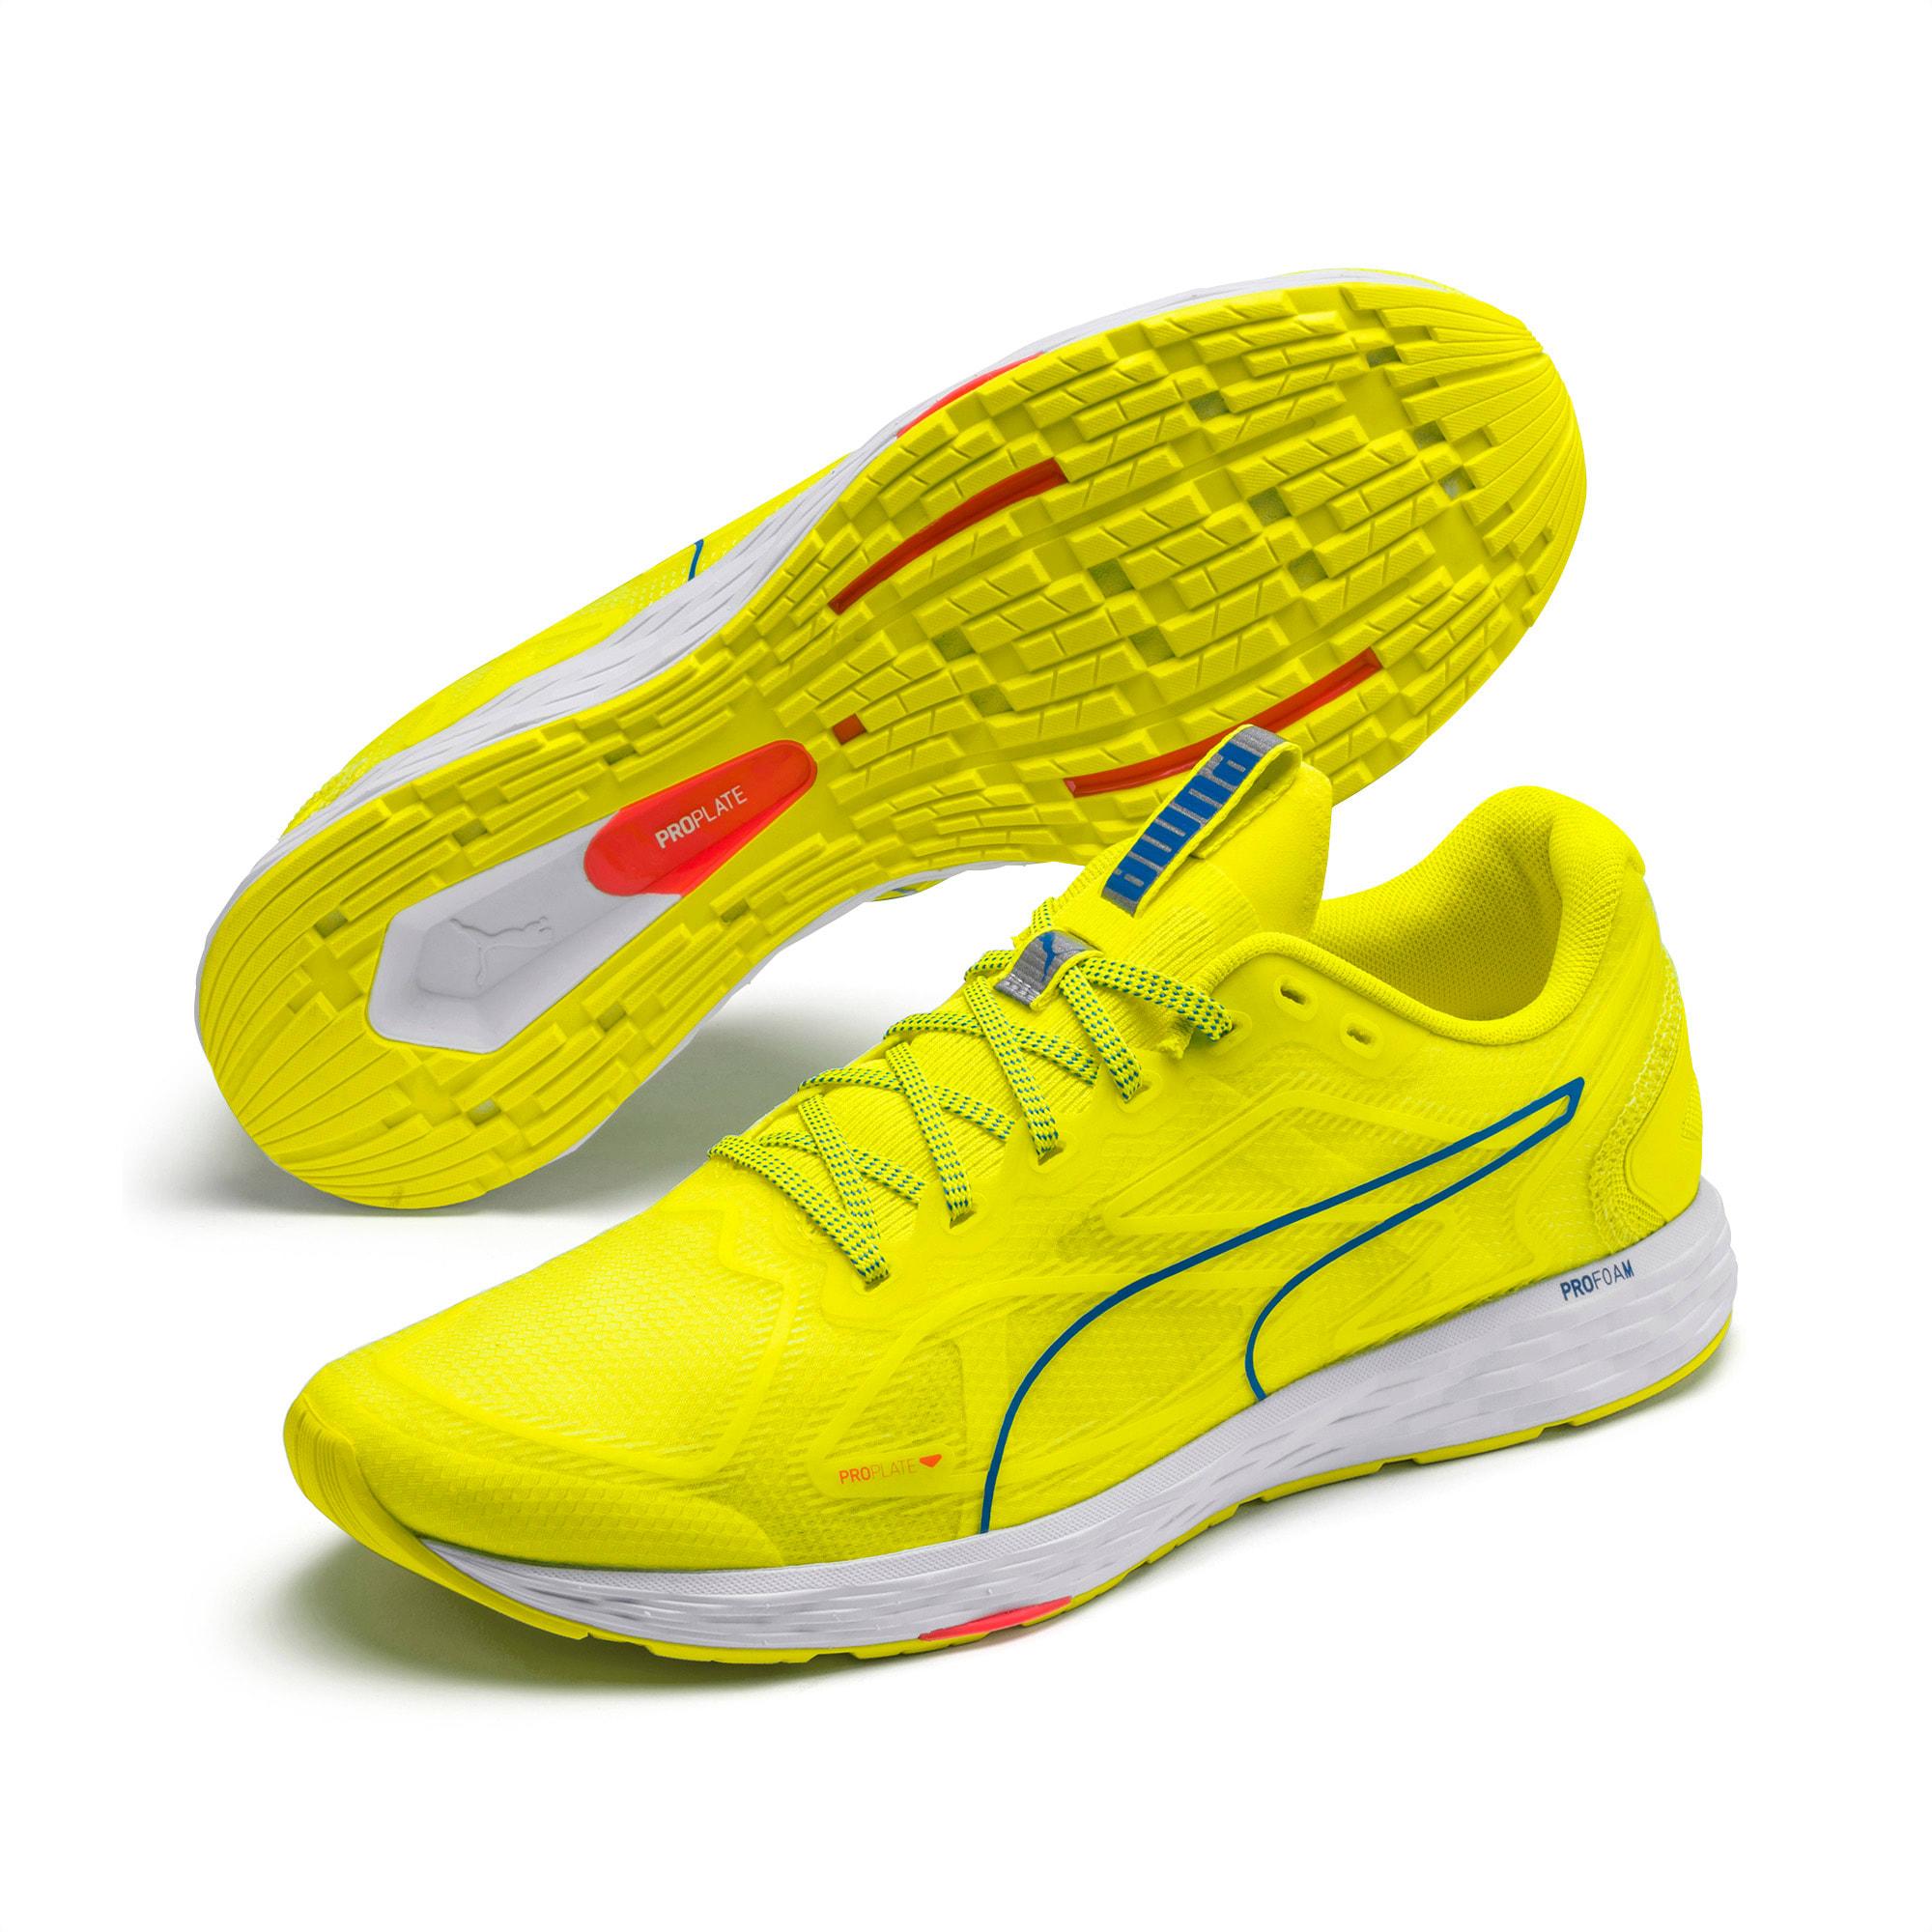 PUMA Suede Speed 300 Racer 2 Running Shoes in Yellow for Men - Lyst